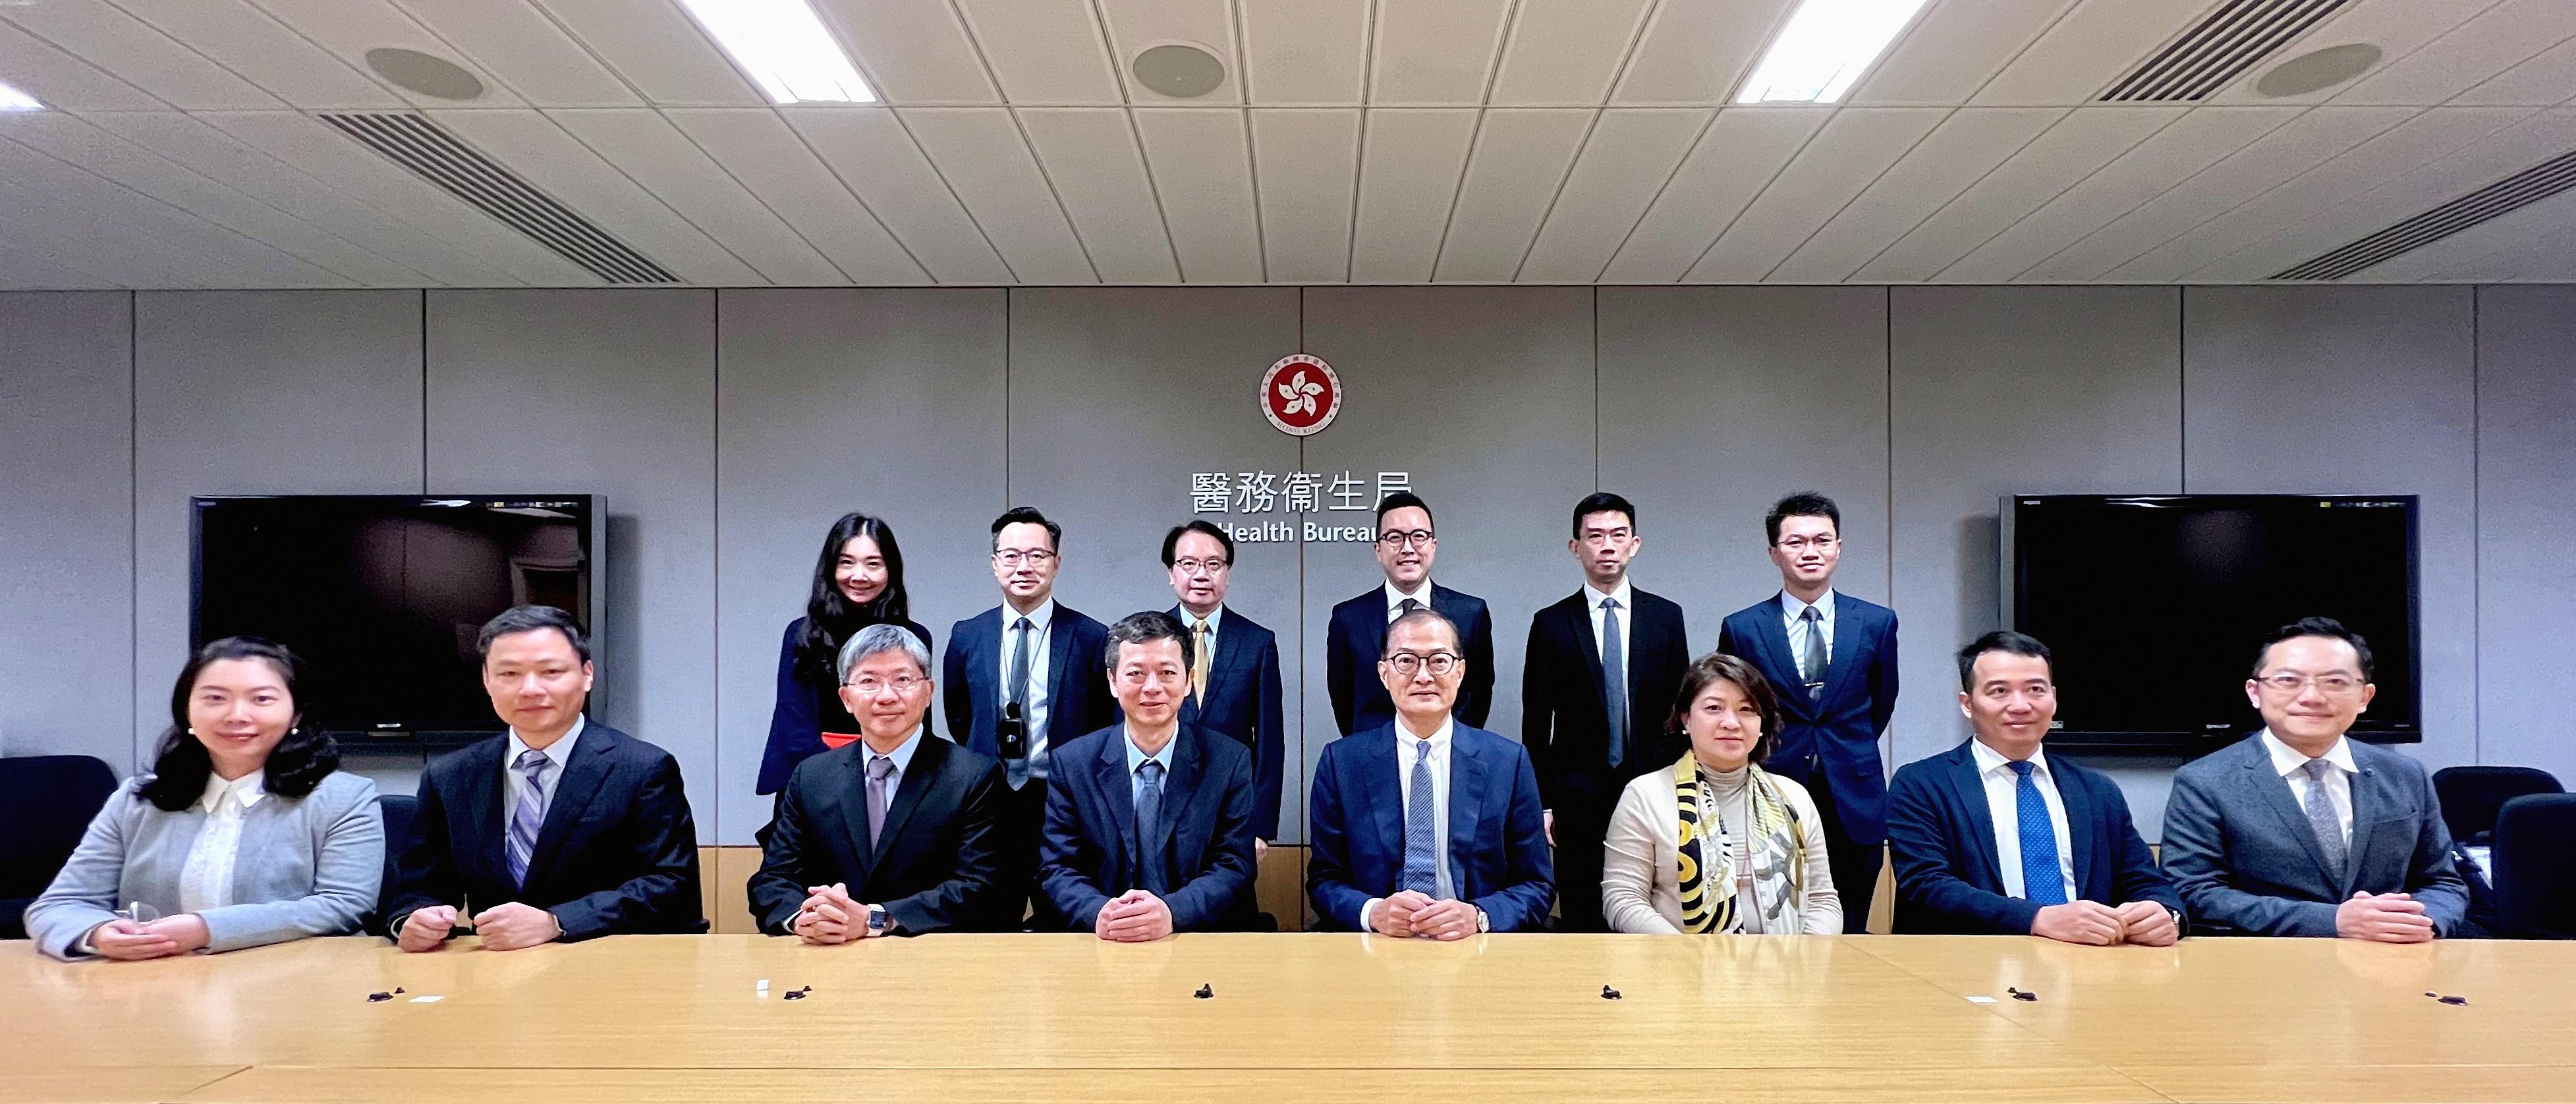 The Secretary for Health, Professor Lo Chung-mau, met with a delegation of the Guangdong Provincial Medical Products Administration led by its General Director, Mr Jiang Xiaodong, at the Central Government Offices today (March 27). Photo shows Professor Lo (front row, fourth right); Mr Jiang (front row, fourth left); the Permanent Secretary for Health, Mr Thomas Chan (front row, third left); the Under Secretary for Health, Dr Libby Lee (front row, third right); the Director of Health, Dr Ronald Lam (front row, first right); Deputy Secretary for Health Mr Eddie Lee (back row, second left); the Project Director of the Chinese Medicine Hospital Project Office, Dr Cheung Wai-lun (back row, third left); Acting Deputy Secretary for Health Mr Gordon Chong (back row, third right); the Head of the Chinese Medicine Unit, Ms Ellen Chan (back row, first left), and other attendees of the meeting.